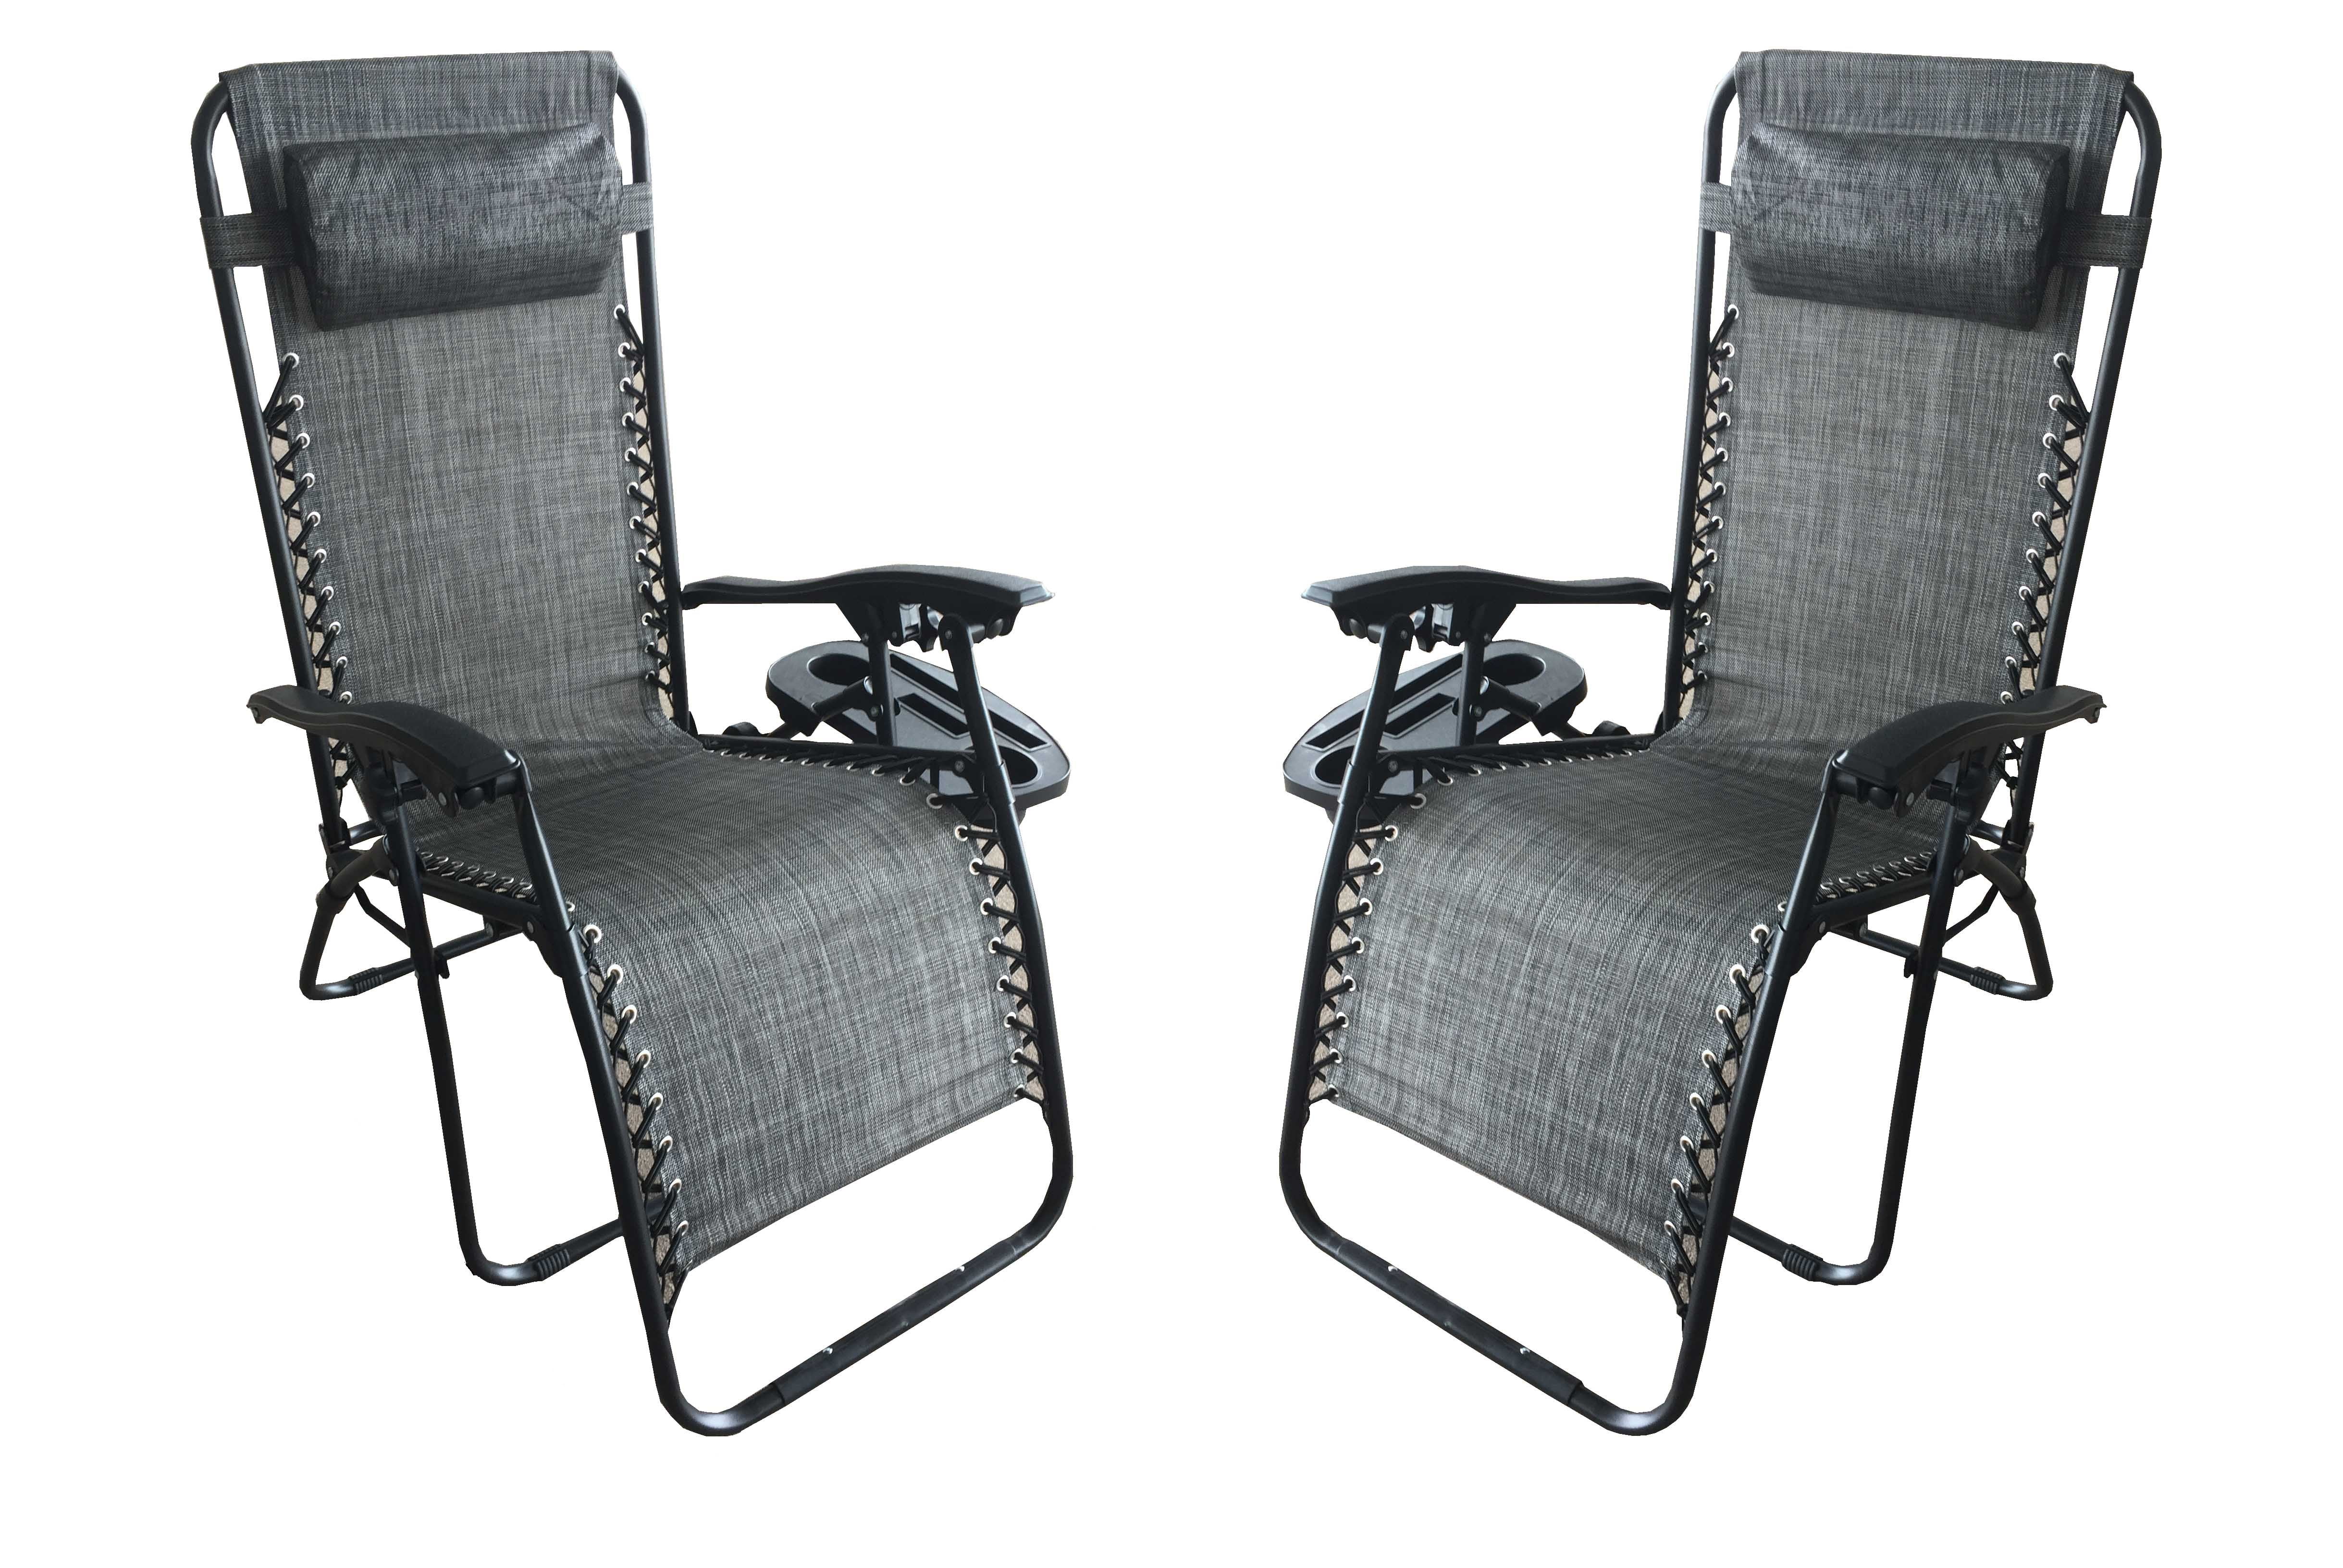 Picture of Bellini V64001A226 21.75 x 23.75 x 28 in. Zero Gravity Recliner & Lounger with Cup Holder in Grey Mesh Fabric - Pack of 2